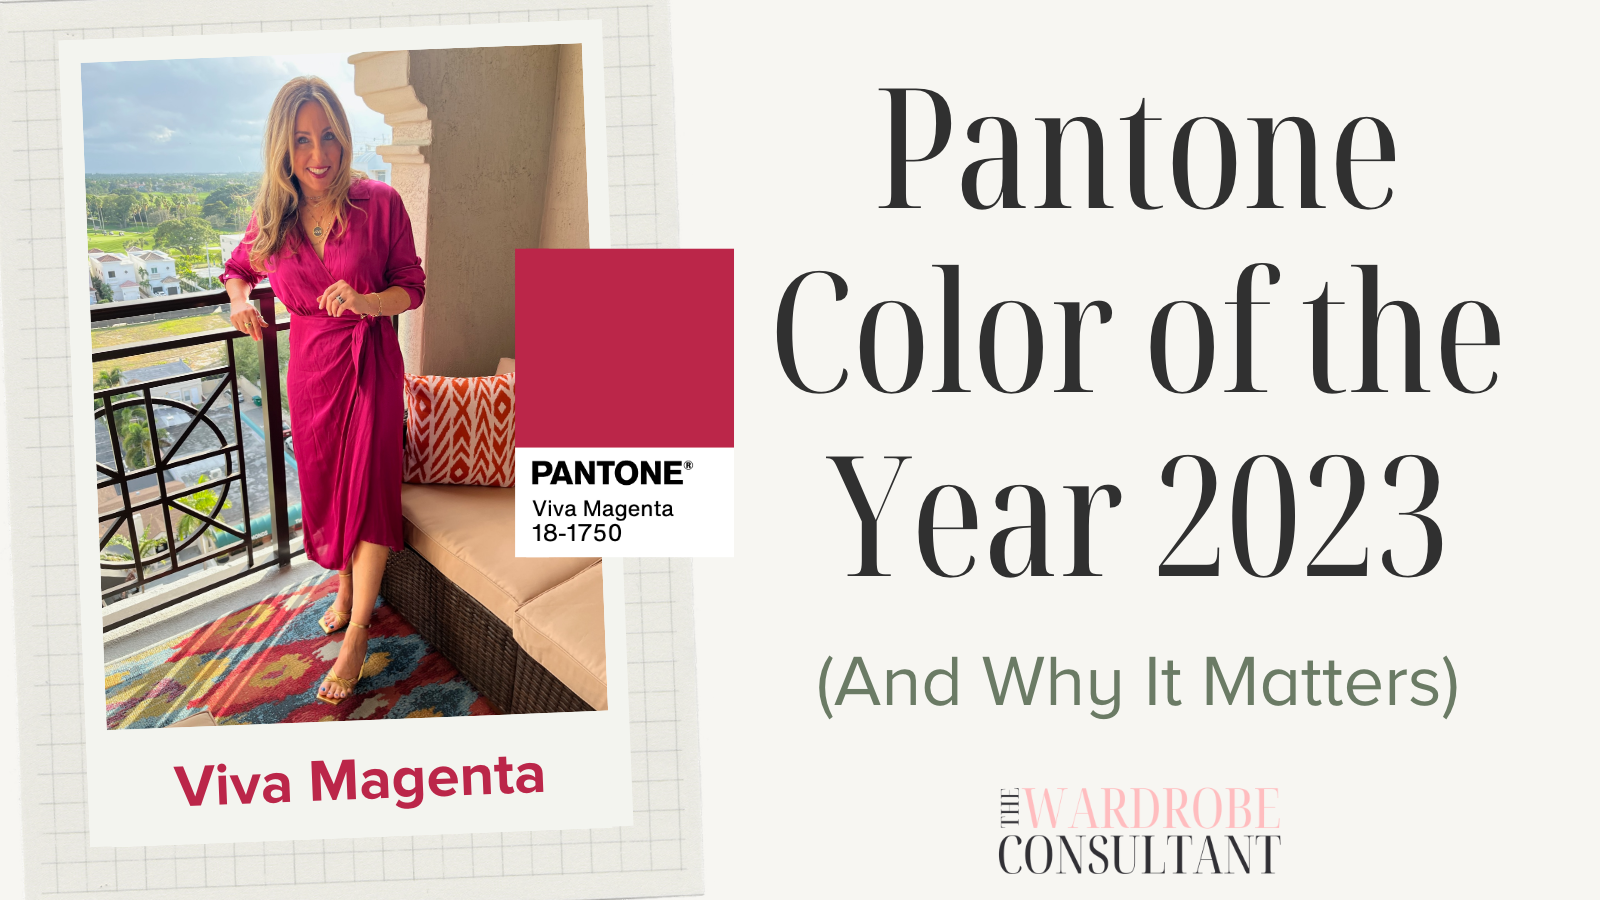 Pantone Color of the Year 2023: Viva Magenta (and Why It Matters